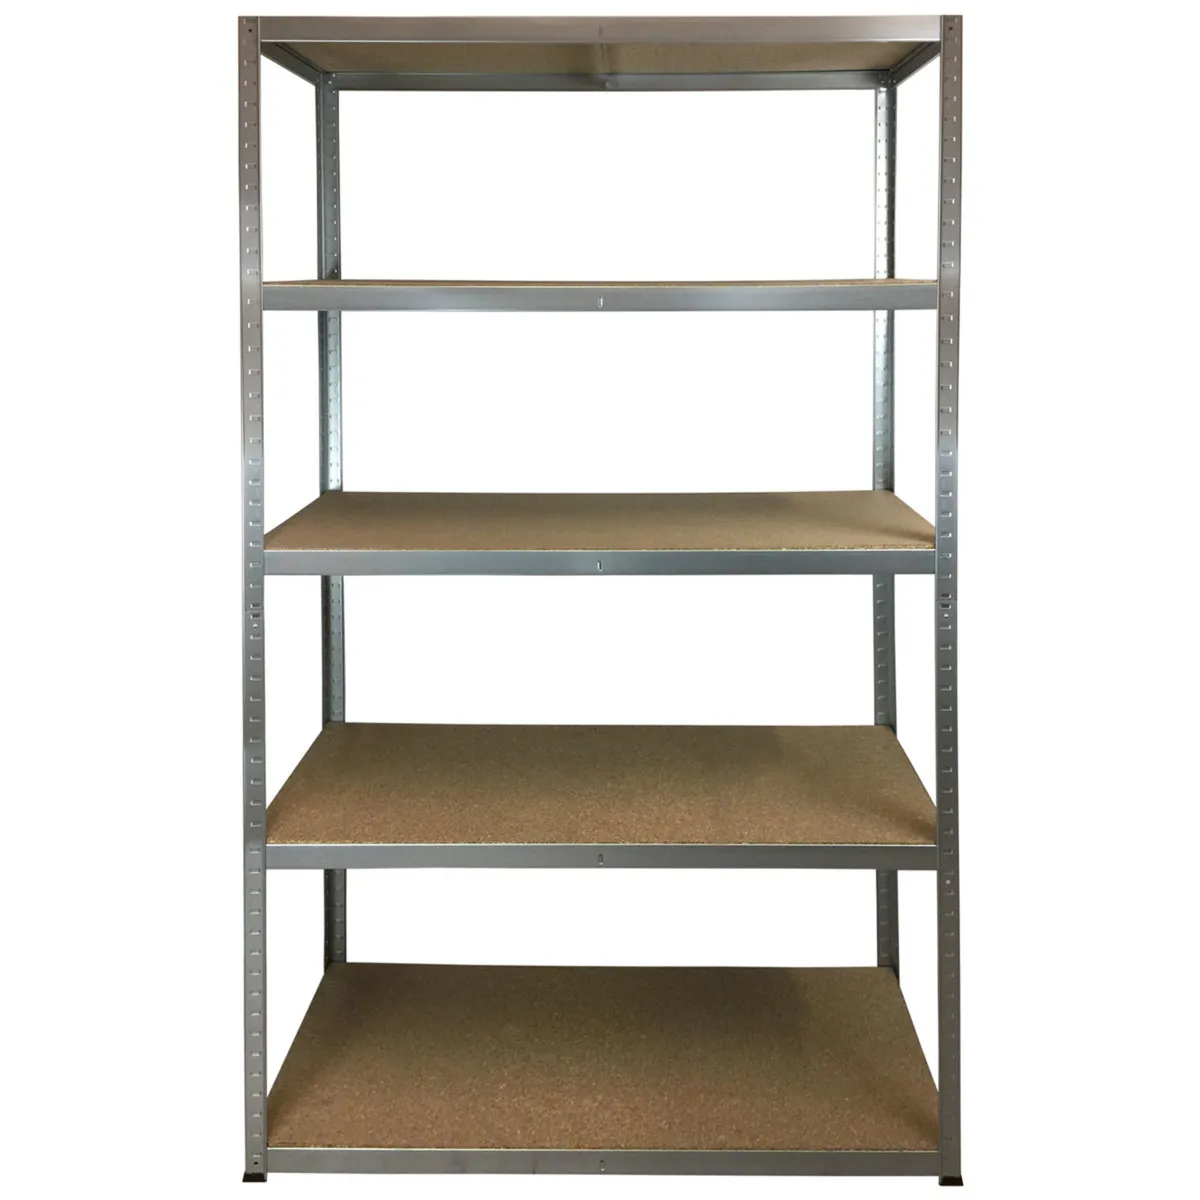 5 Shelving bays 1960h x 1200L x 500D Free Delivery